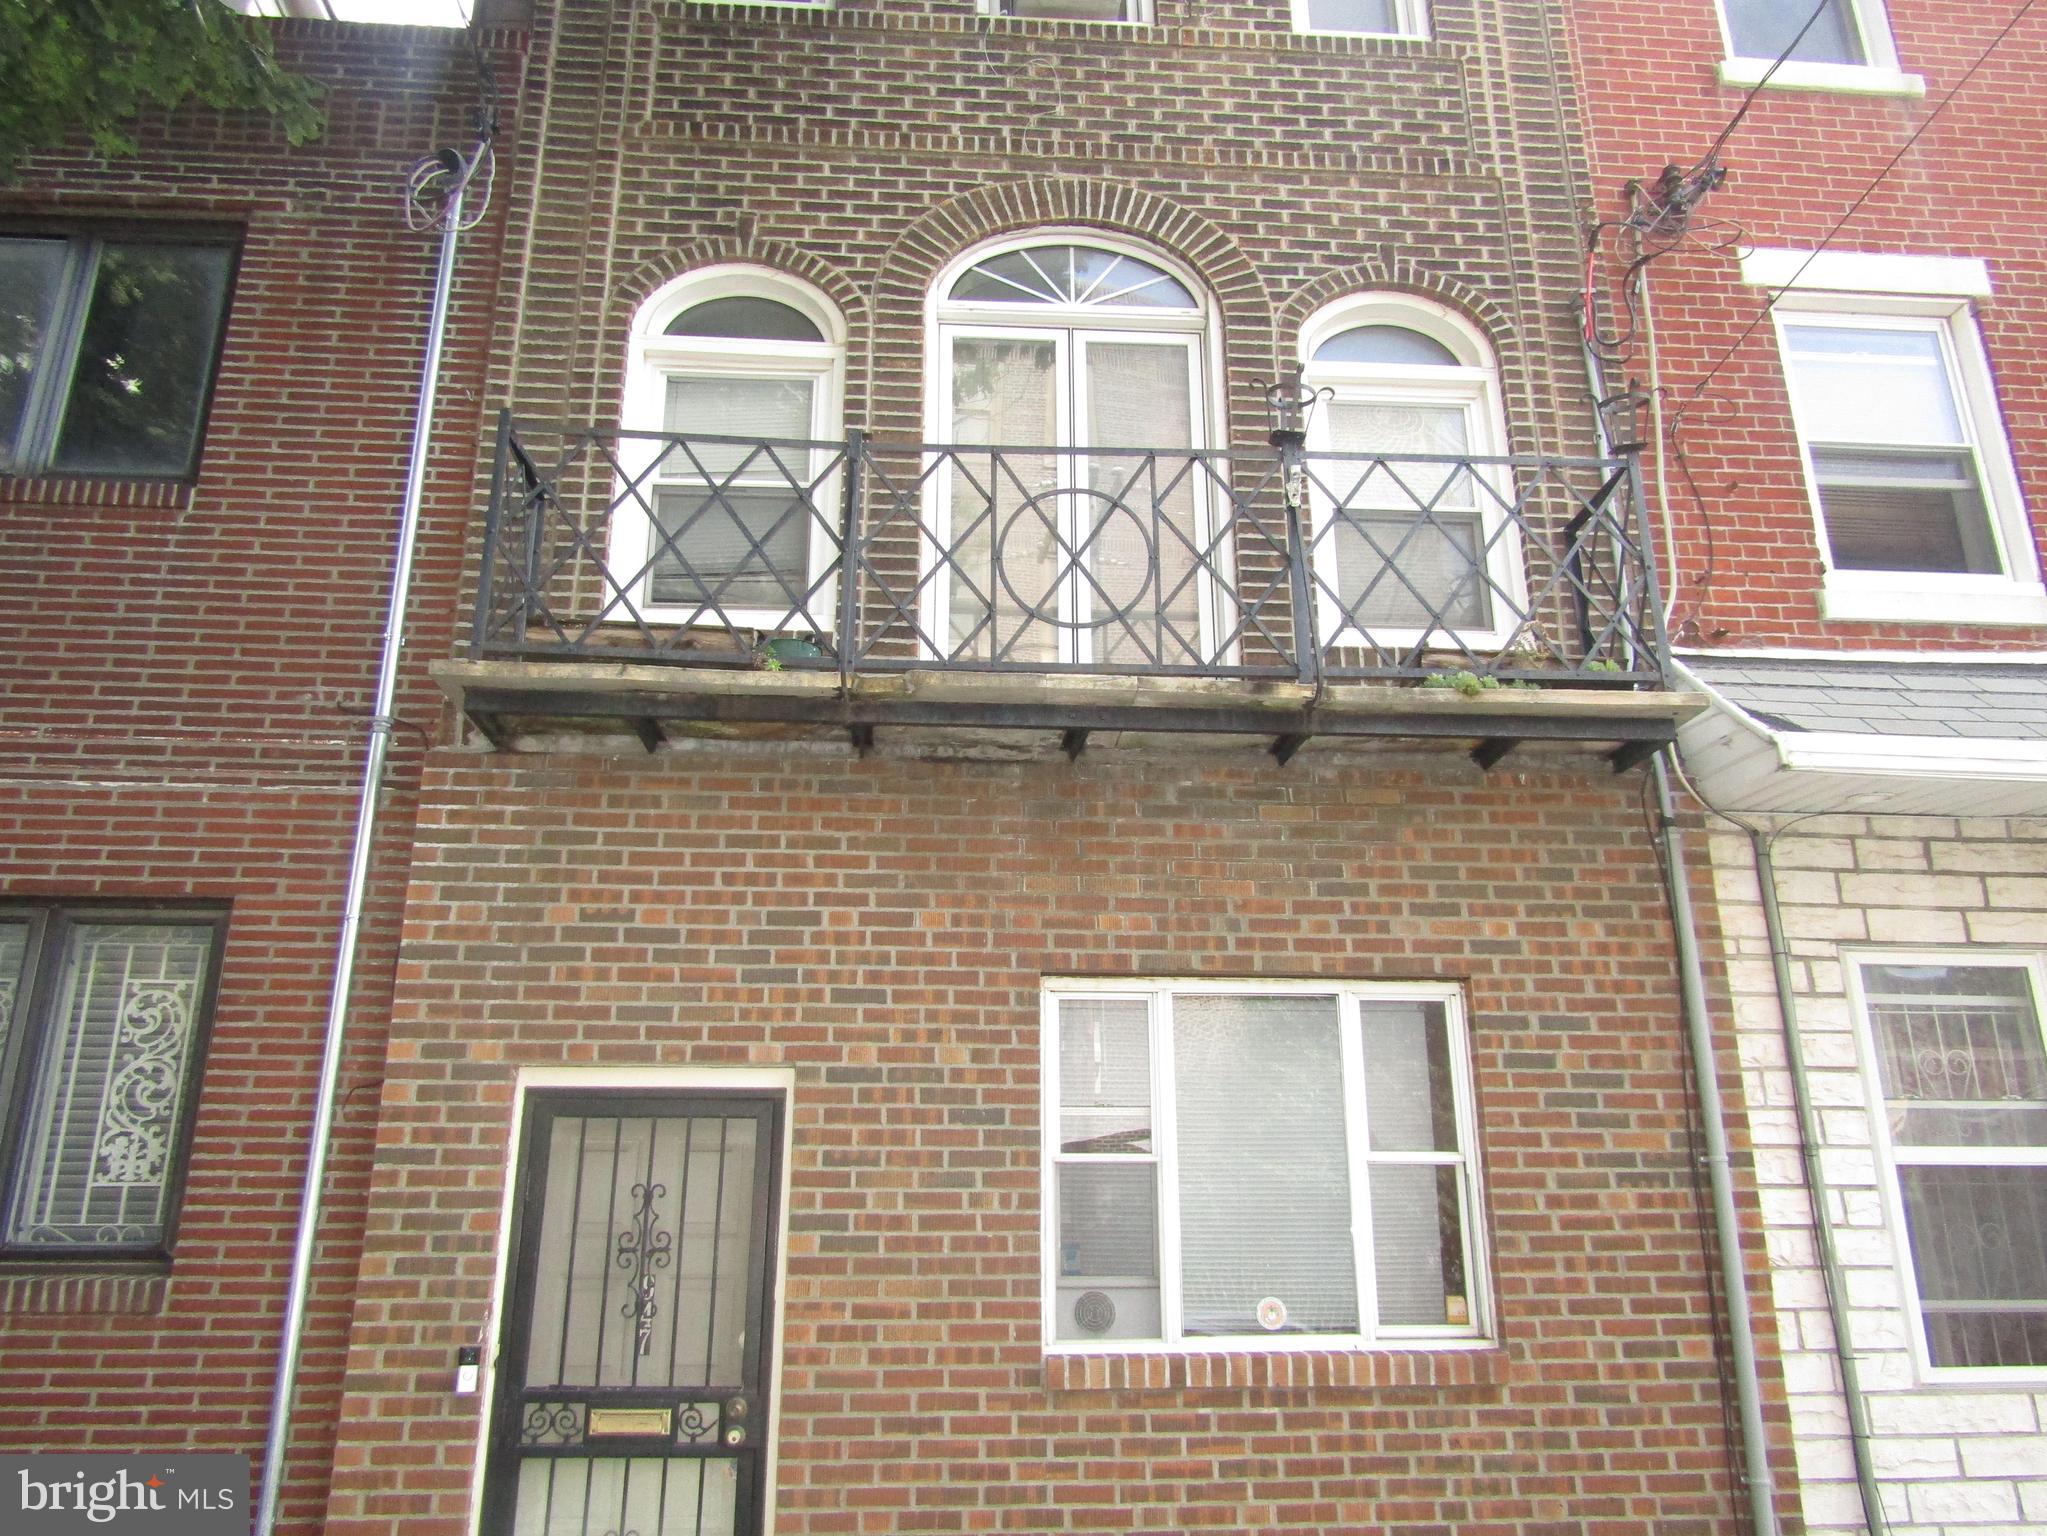 a view of two brick house with large windows